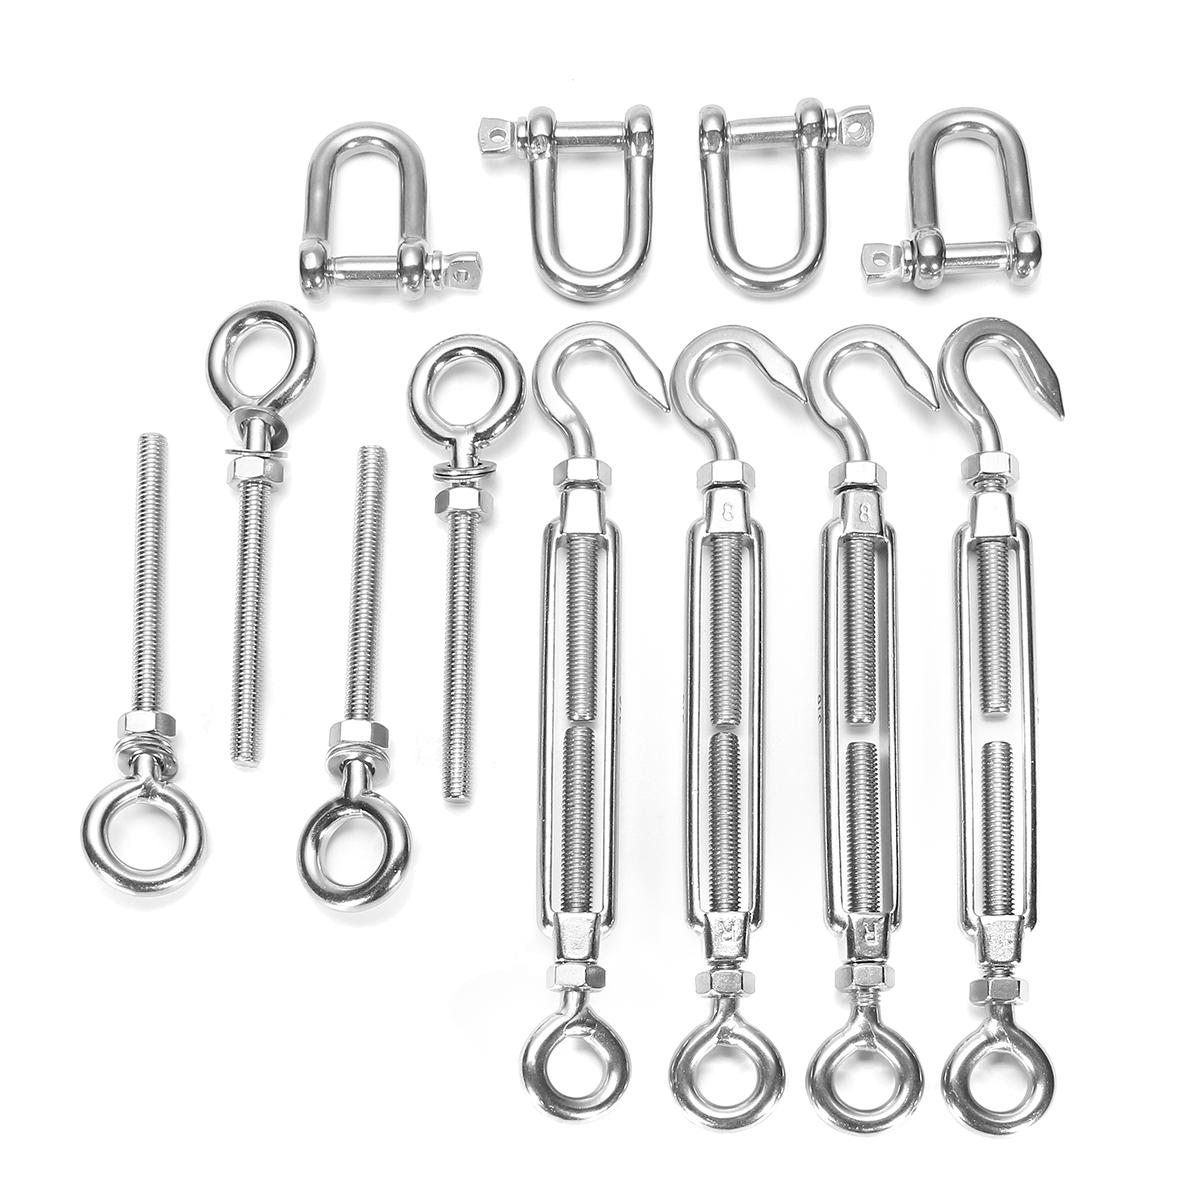 12Pcs Stainless Steel Sun Sail Shade Garden Canopy Fixing Fittings Hardware Accessory Kit